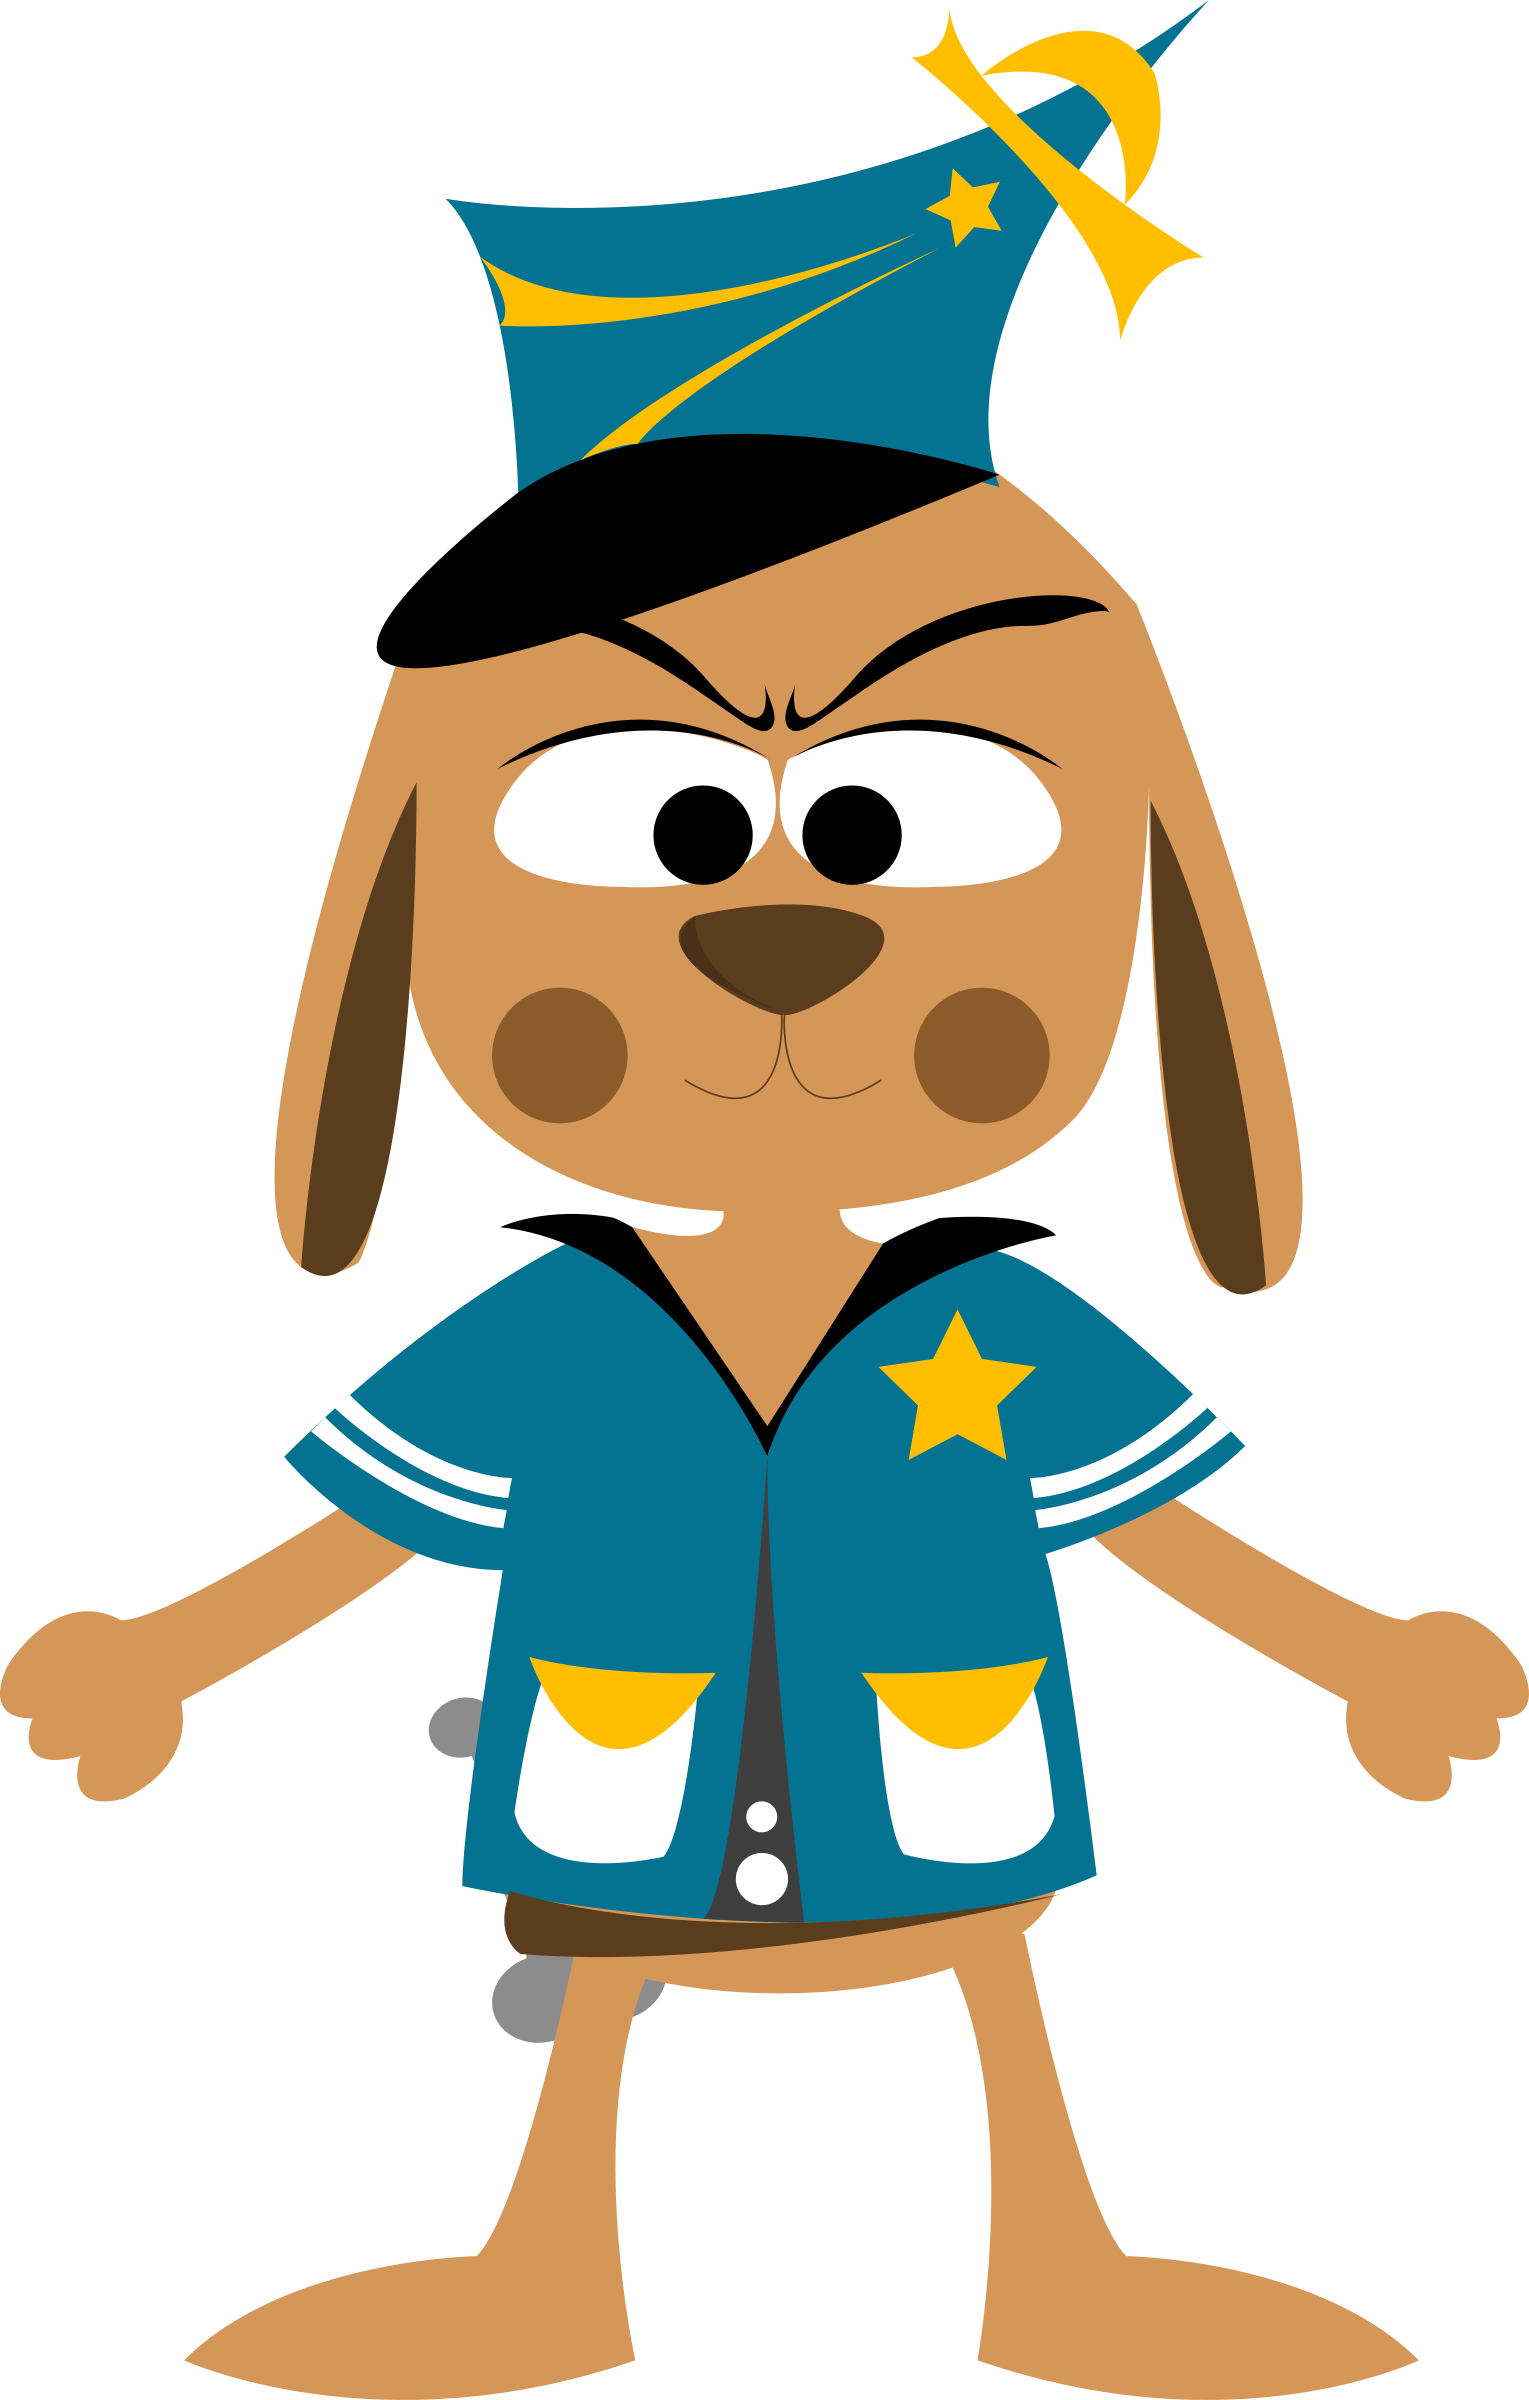 ... Police dog clipart ...